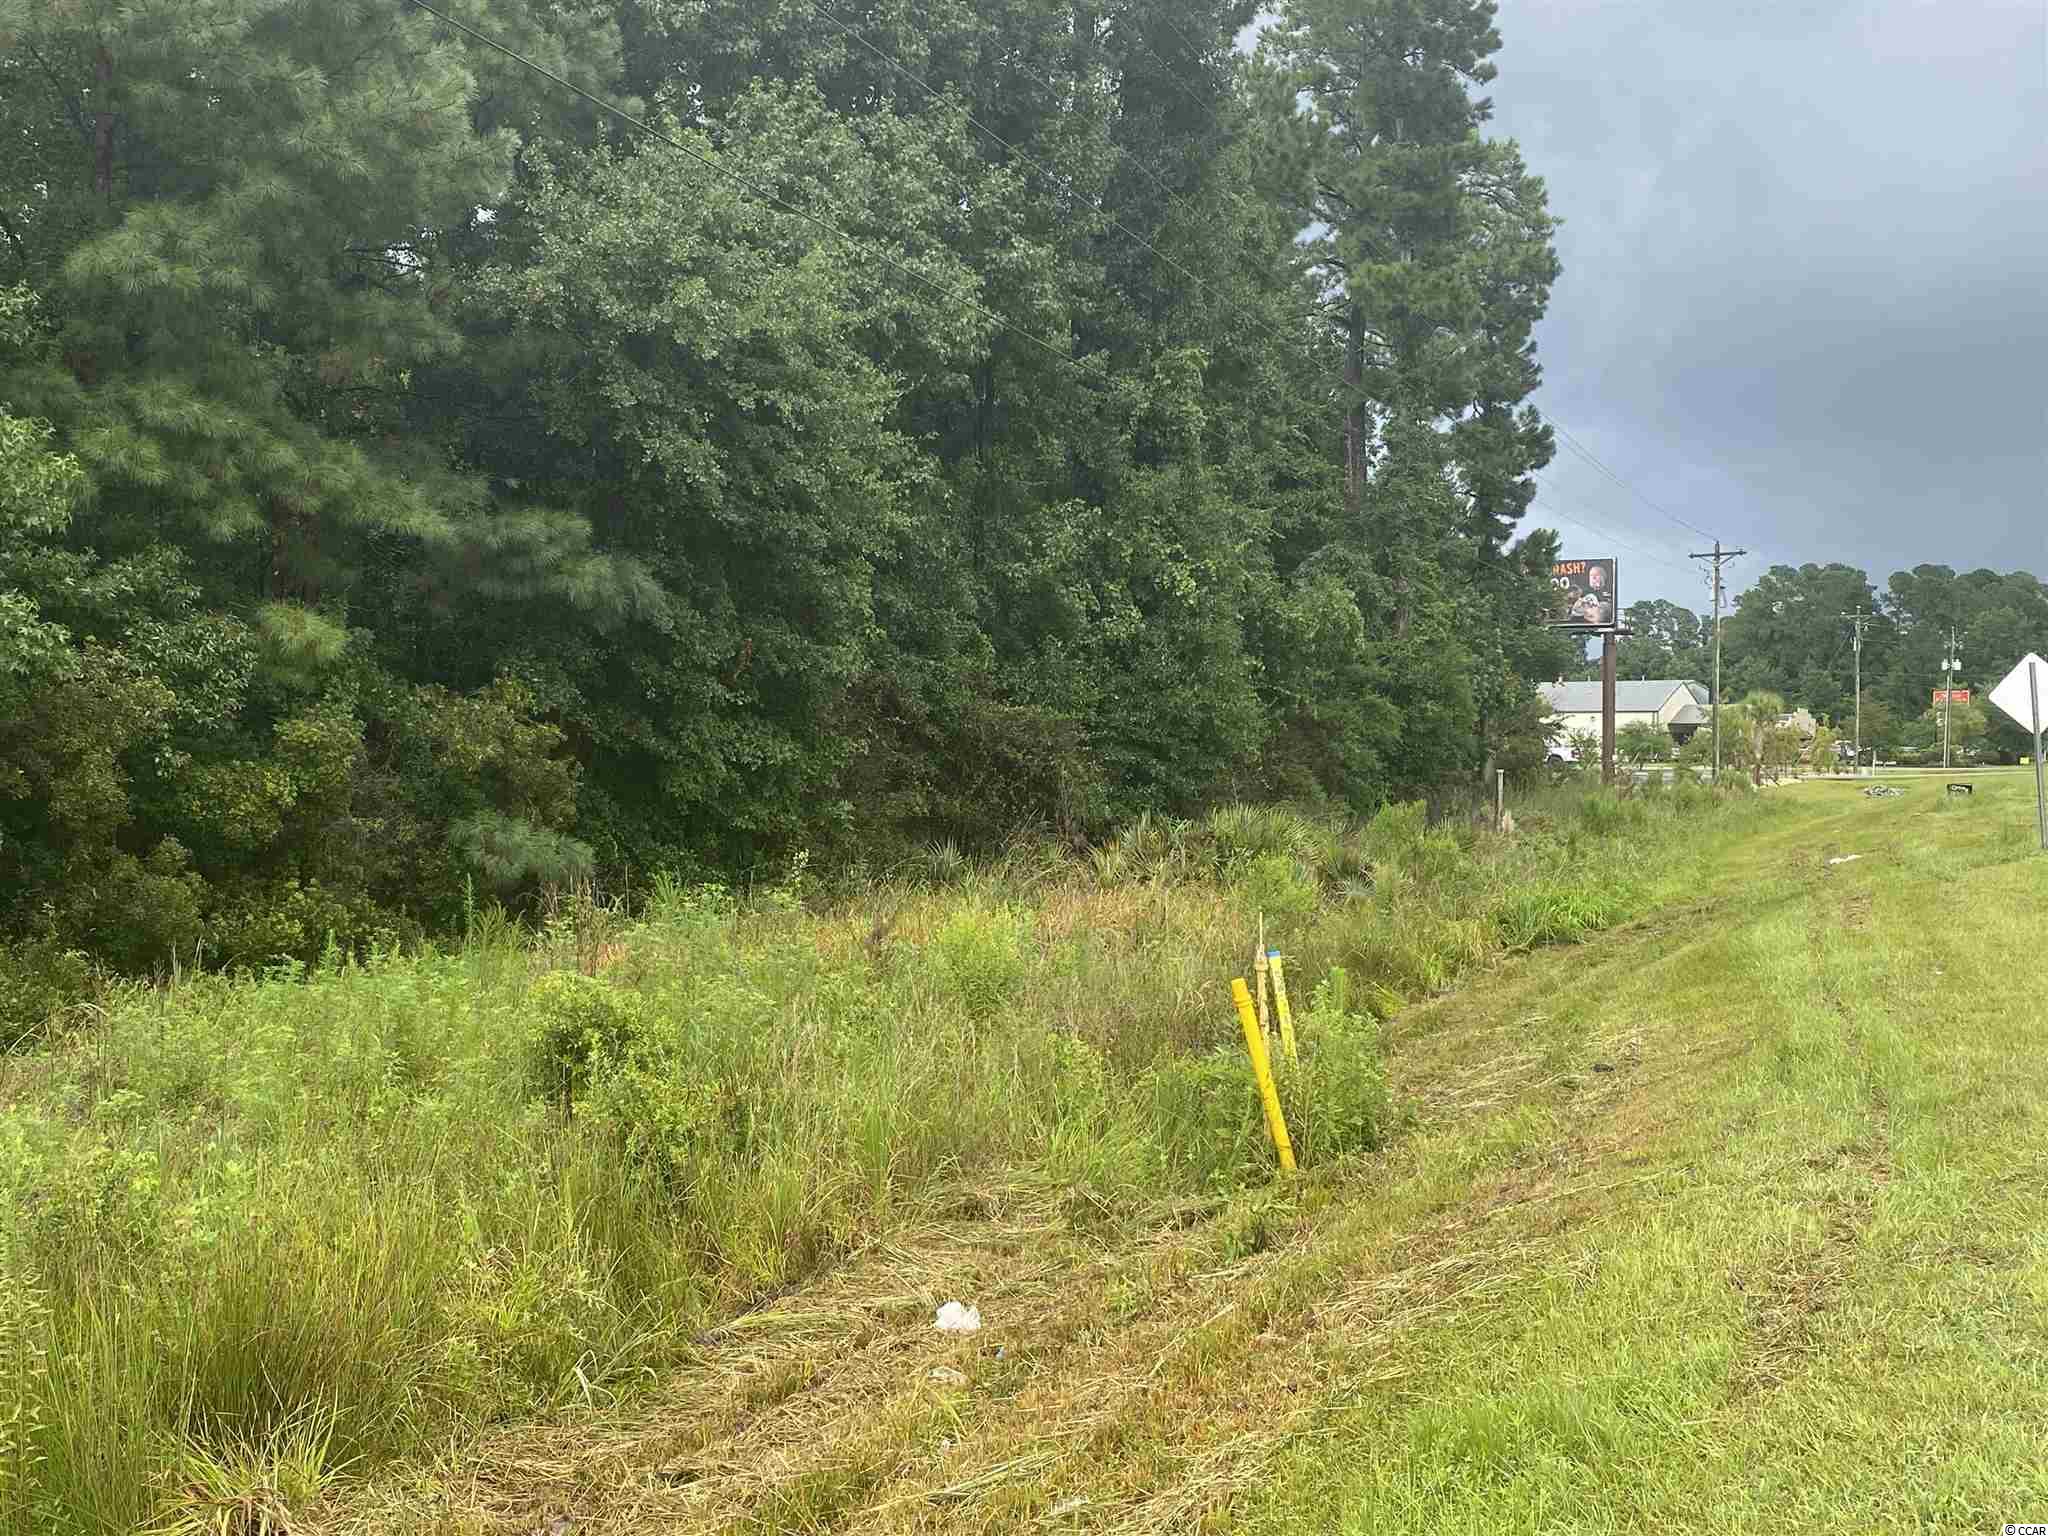 endless possibilities for this prime corner lot measuring .82 acres. the parcel is  located directly on highway 378 and the intersection of green pond circle road.  the land is zoned highway commercial  with multiple possibilities for development. us army corps of engineers approved jurisdiction determination was received december 2020. don't miss this development opportunity contact your realtor to schedule a showing today!